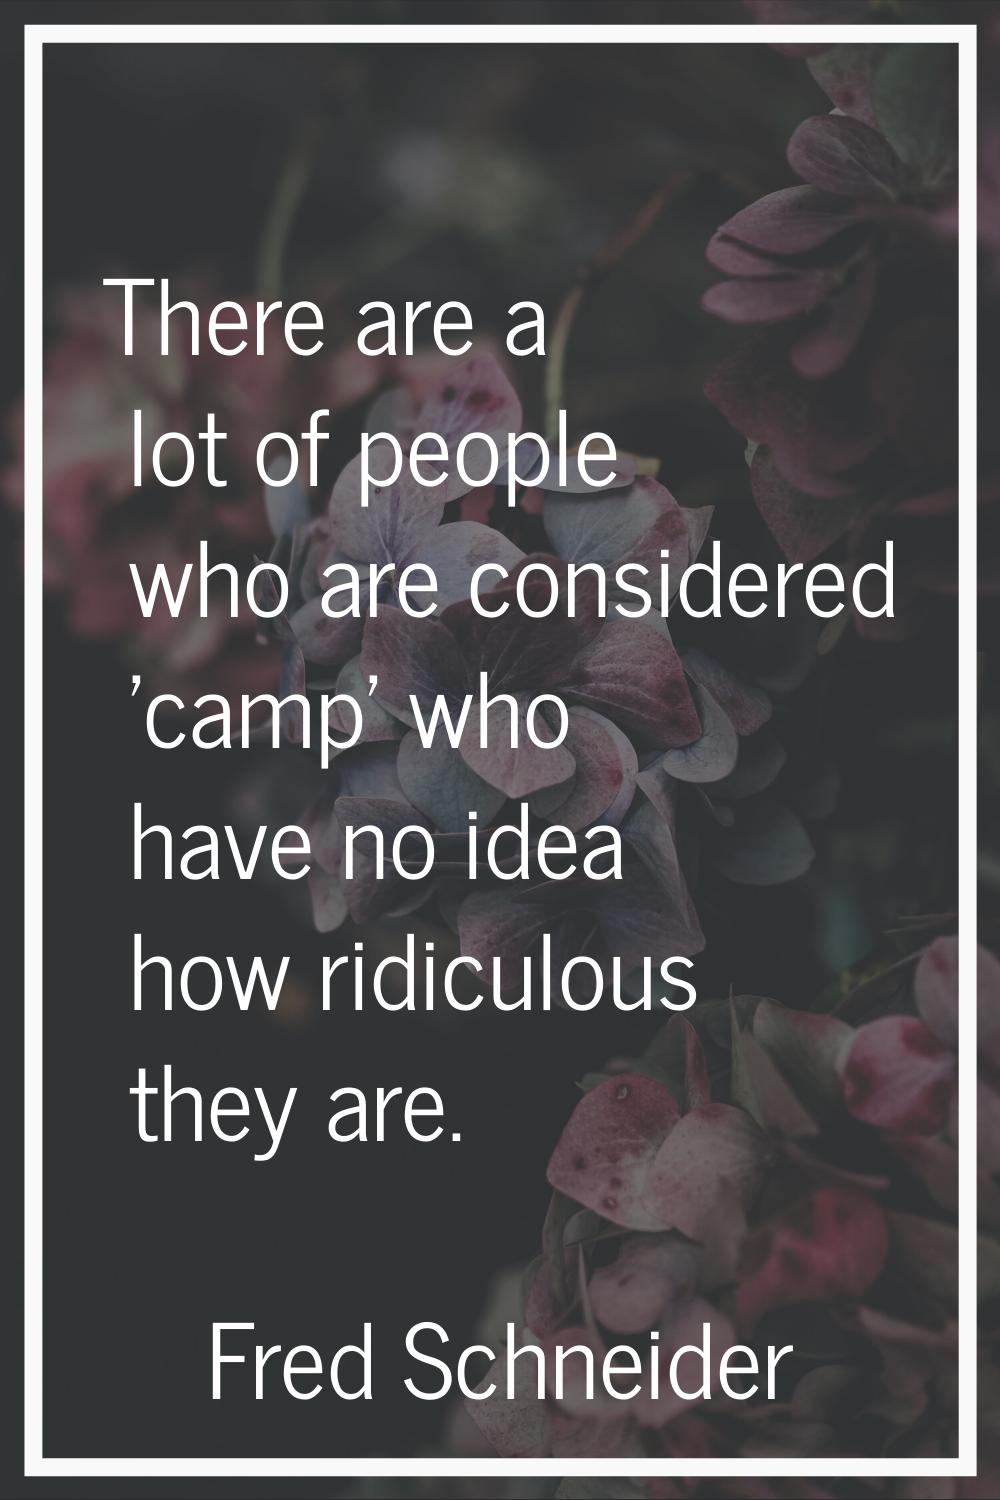 There are a lot of people who are considered 'camp' who have no idea how ridiculous they are.